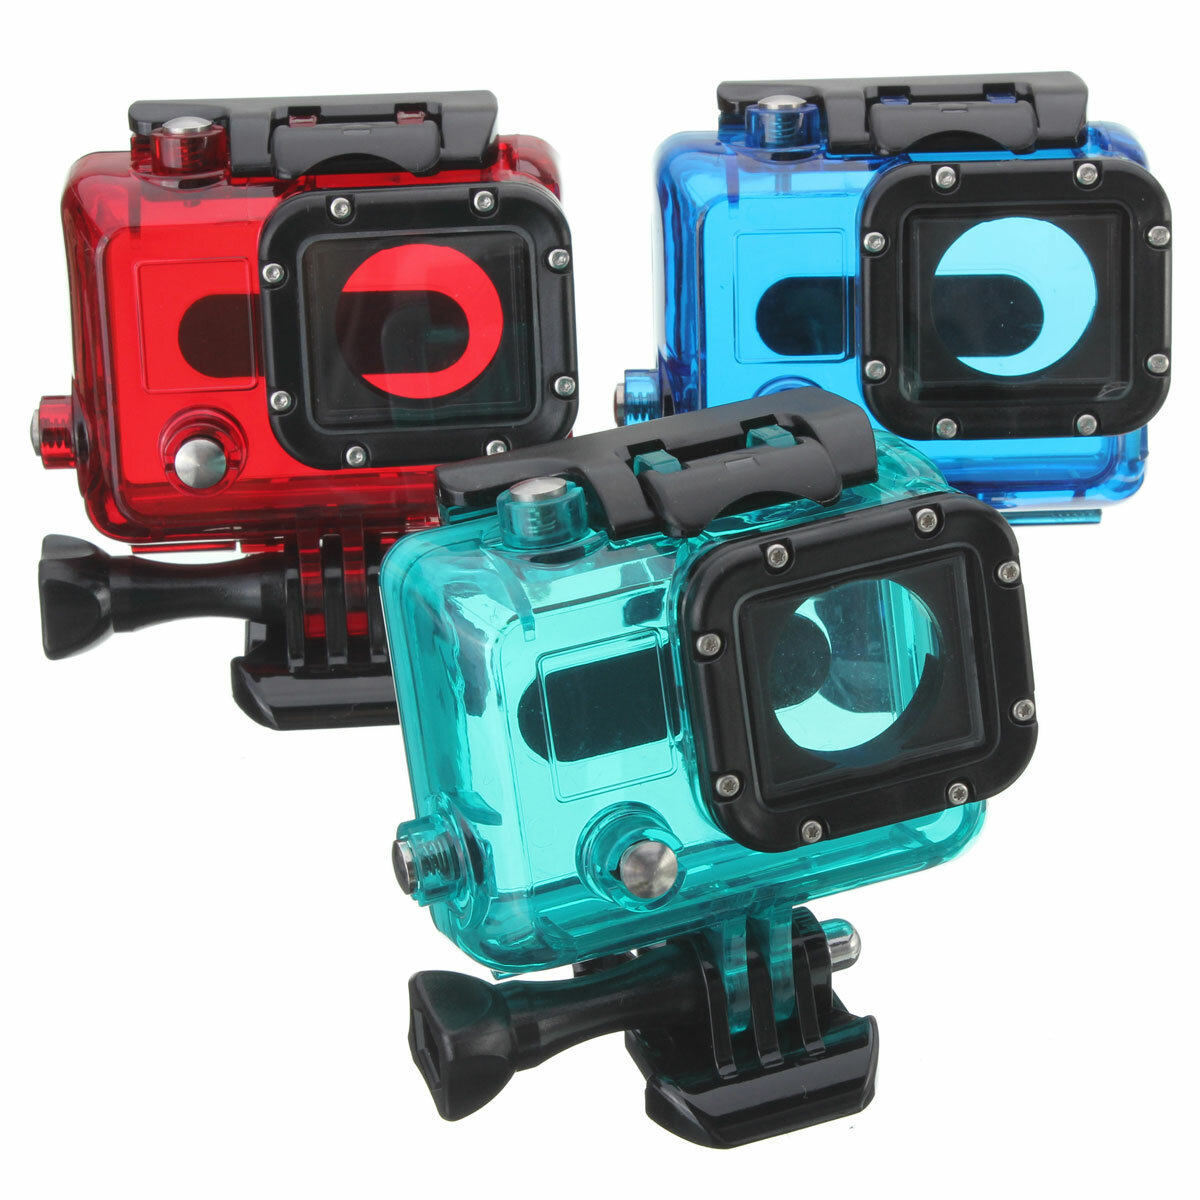 Dive Case Waterproof Protect Housing Cover Lens Removal For GoPro HERO 3 Action Camera